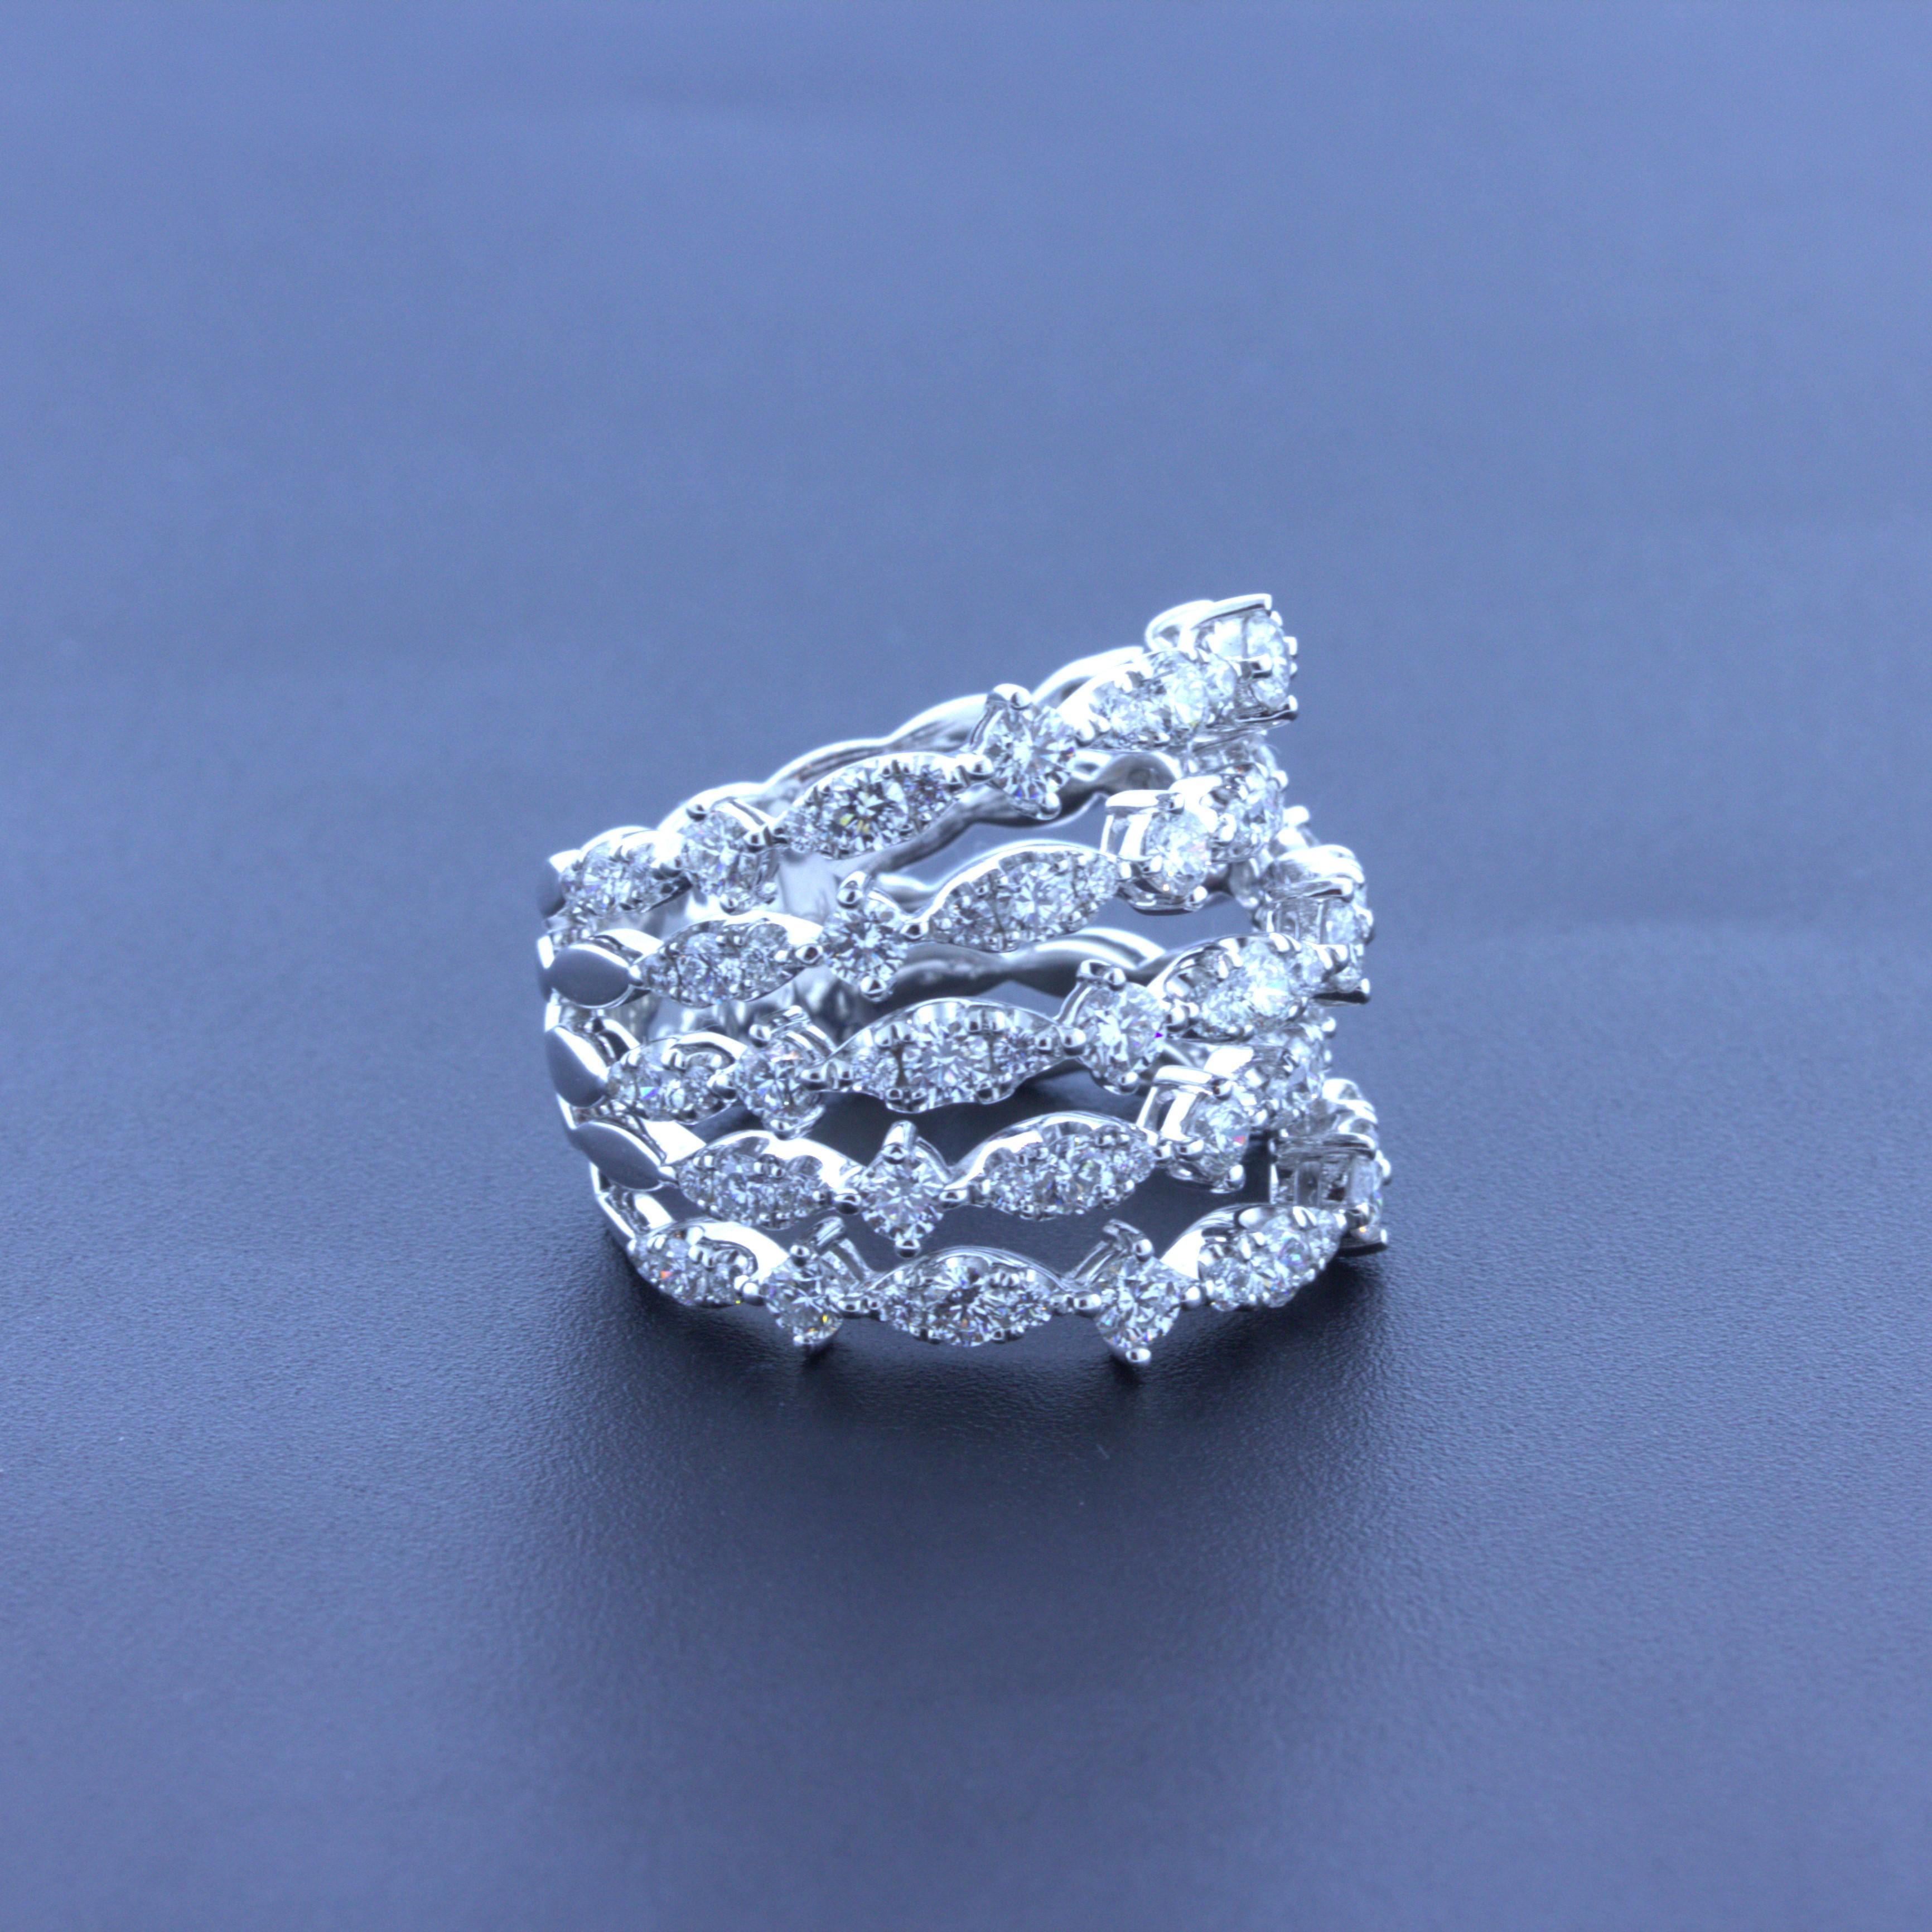 A modern and stylish diamond ring made in 18k white gold. It features 2.83 carats of round brilliant-cut diamonds set across 5 rows which wrap around the finger. The diamond setting alternates from 1 larger single diamond to 3 diamonds set by each